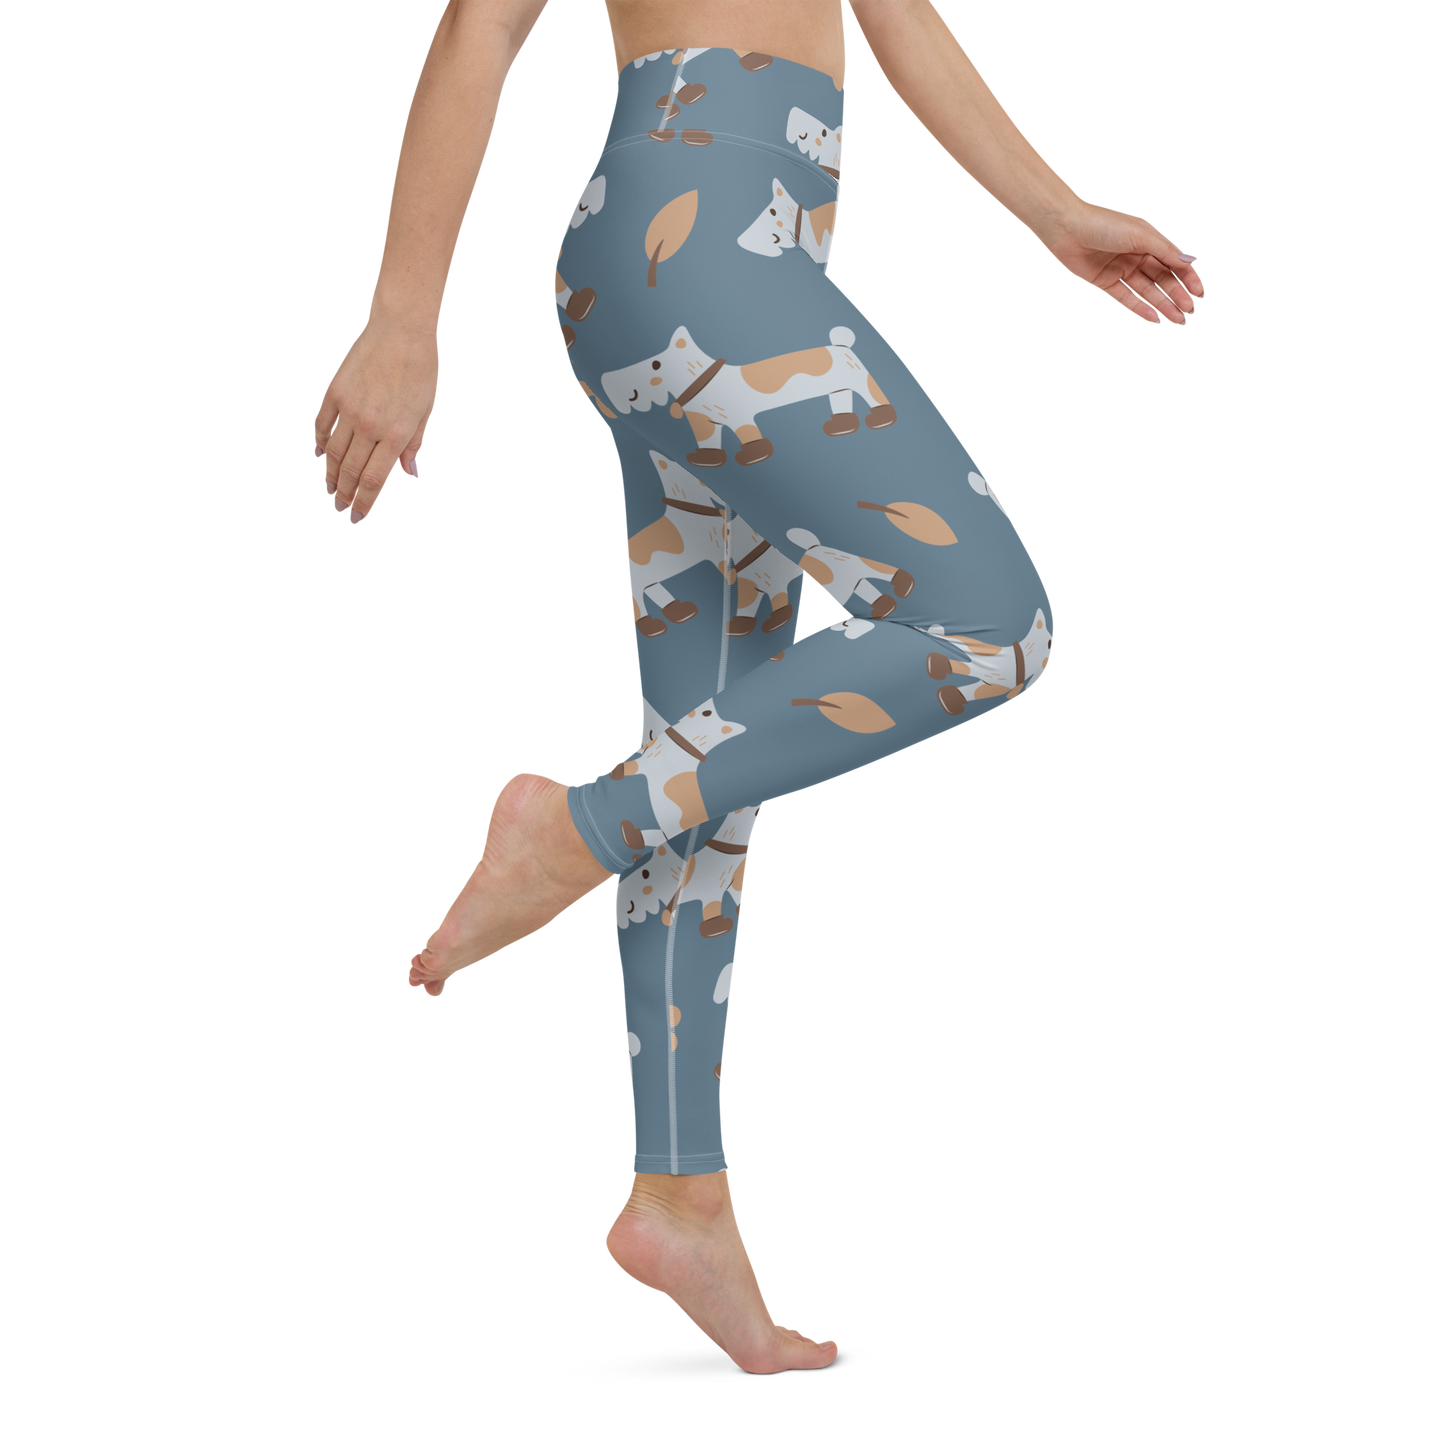 Cozy Dogs | Seamless Patterns | All-Over Print Yoga Leggings - #2